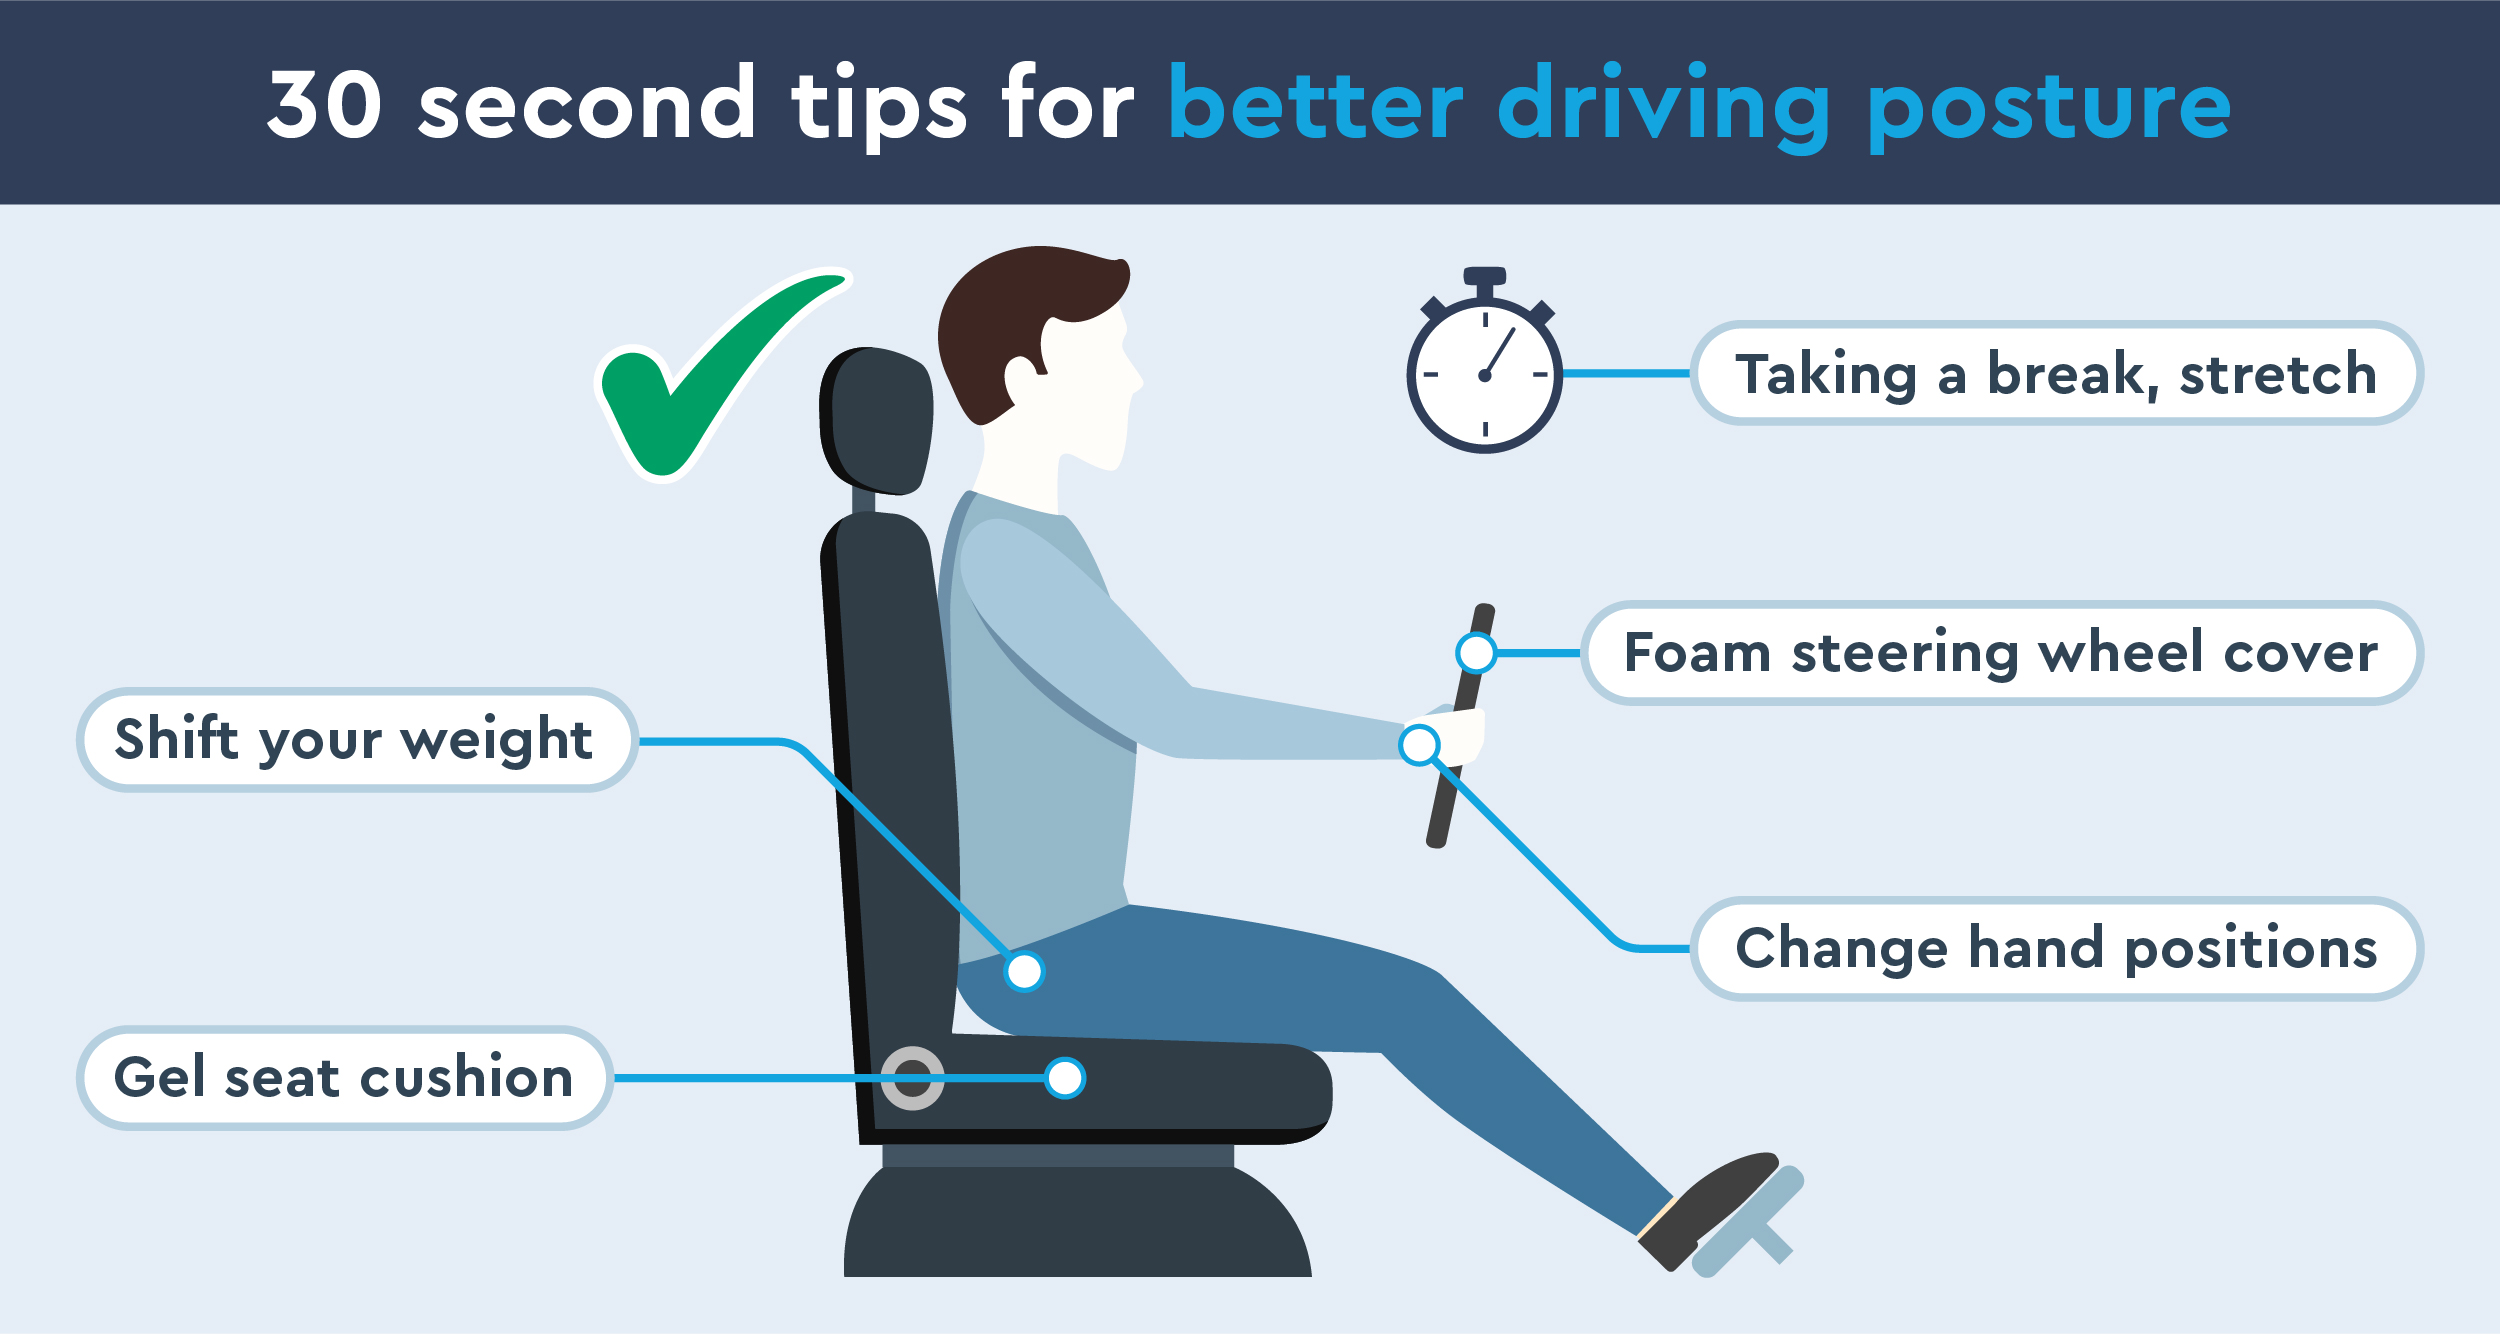 How can I make sure I have found the perfect driving position?